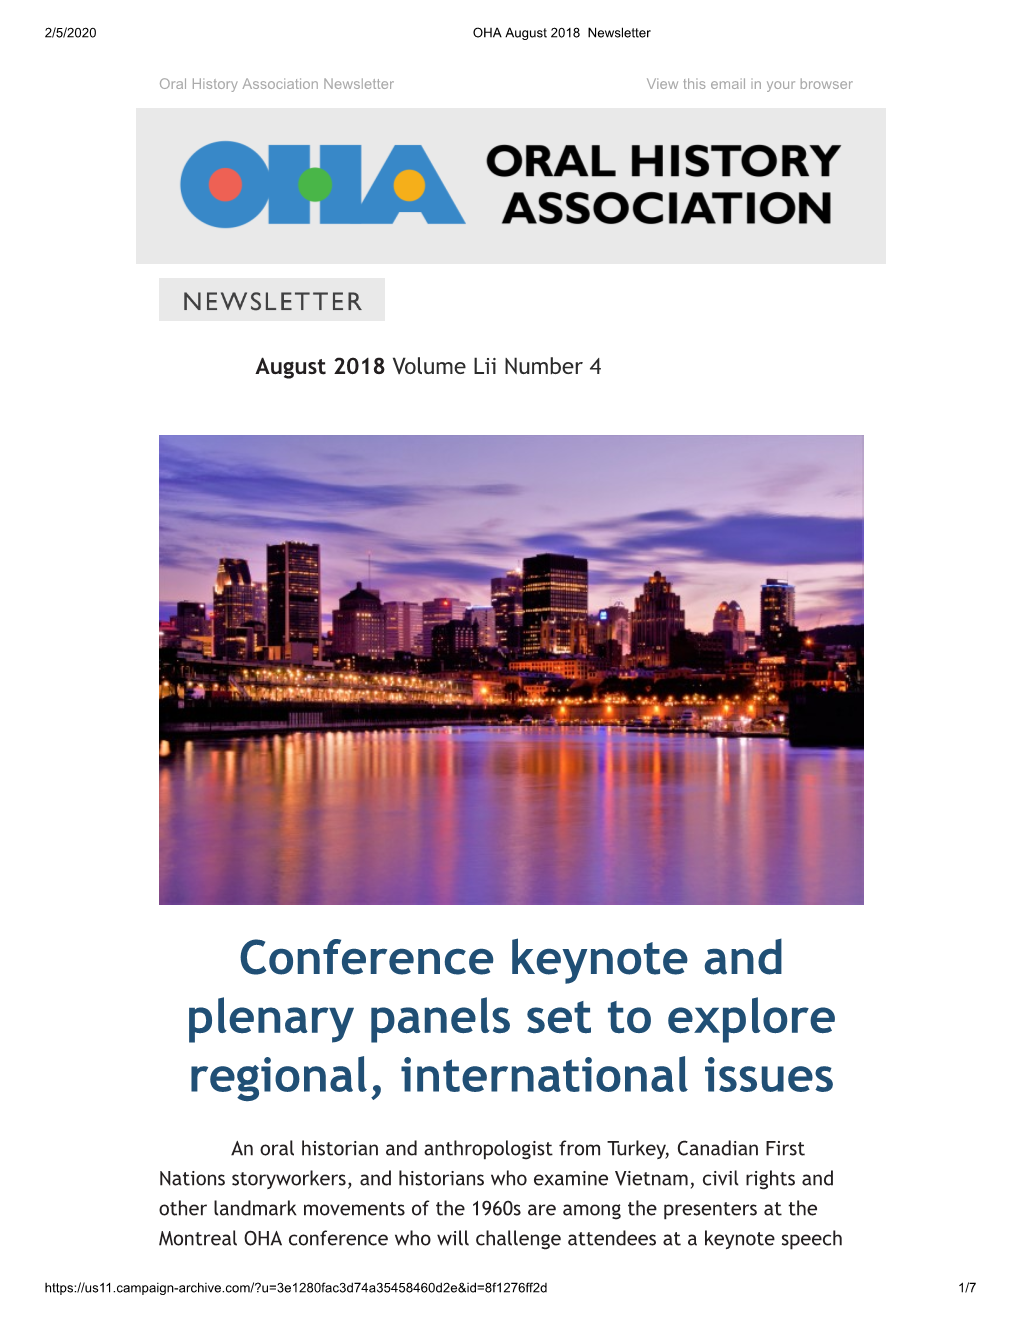 Conference Keynote and Plenary Panels Set to Explore Regional, International Issues